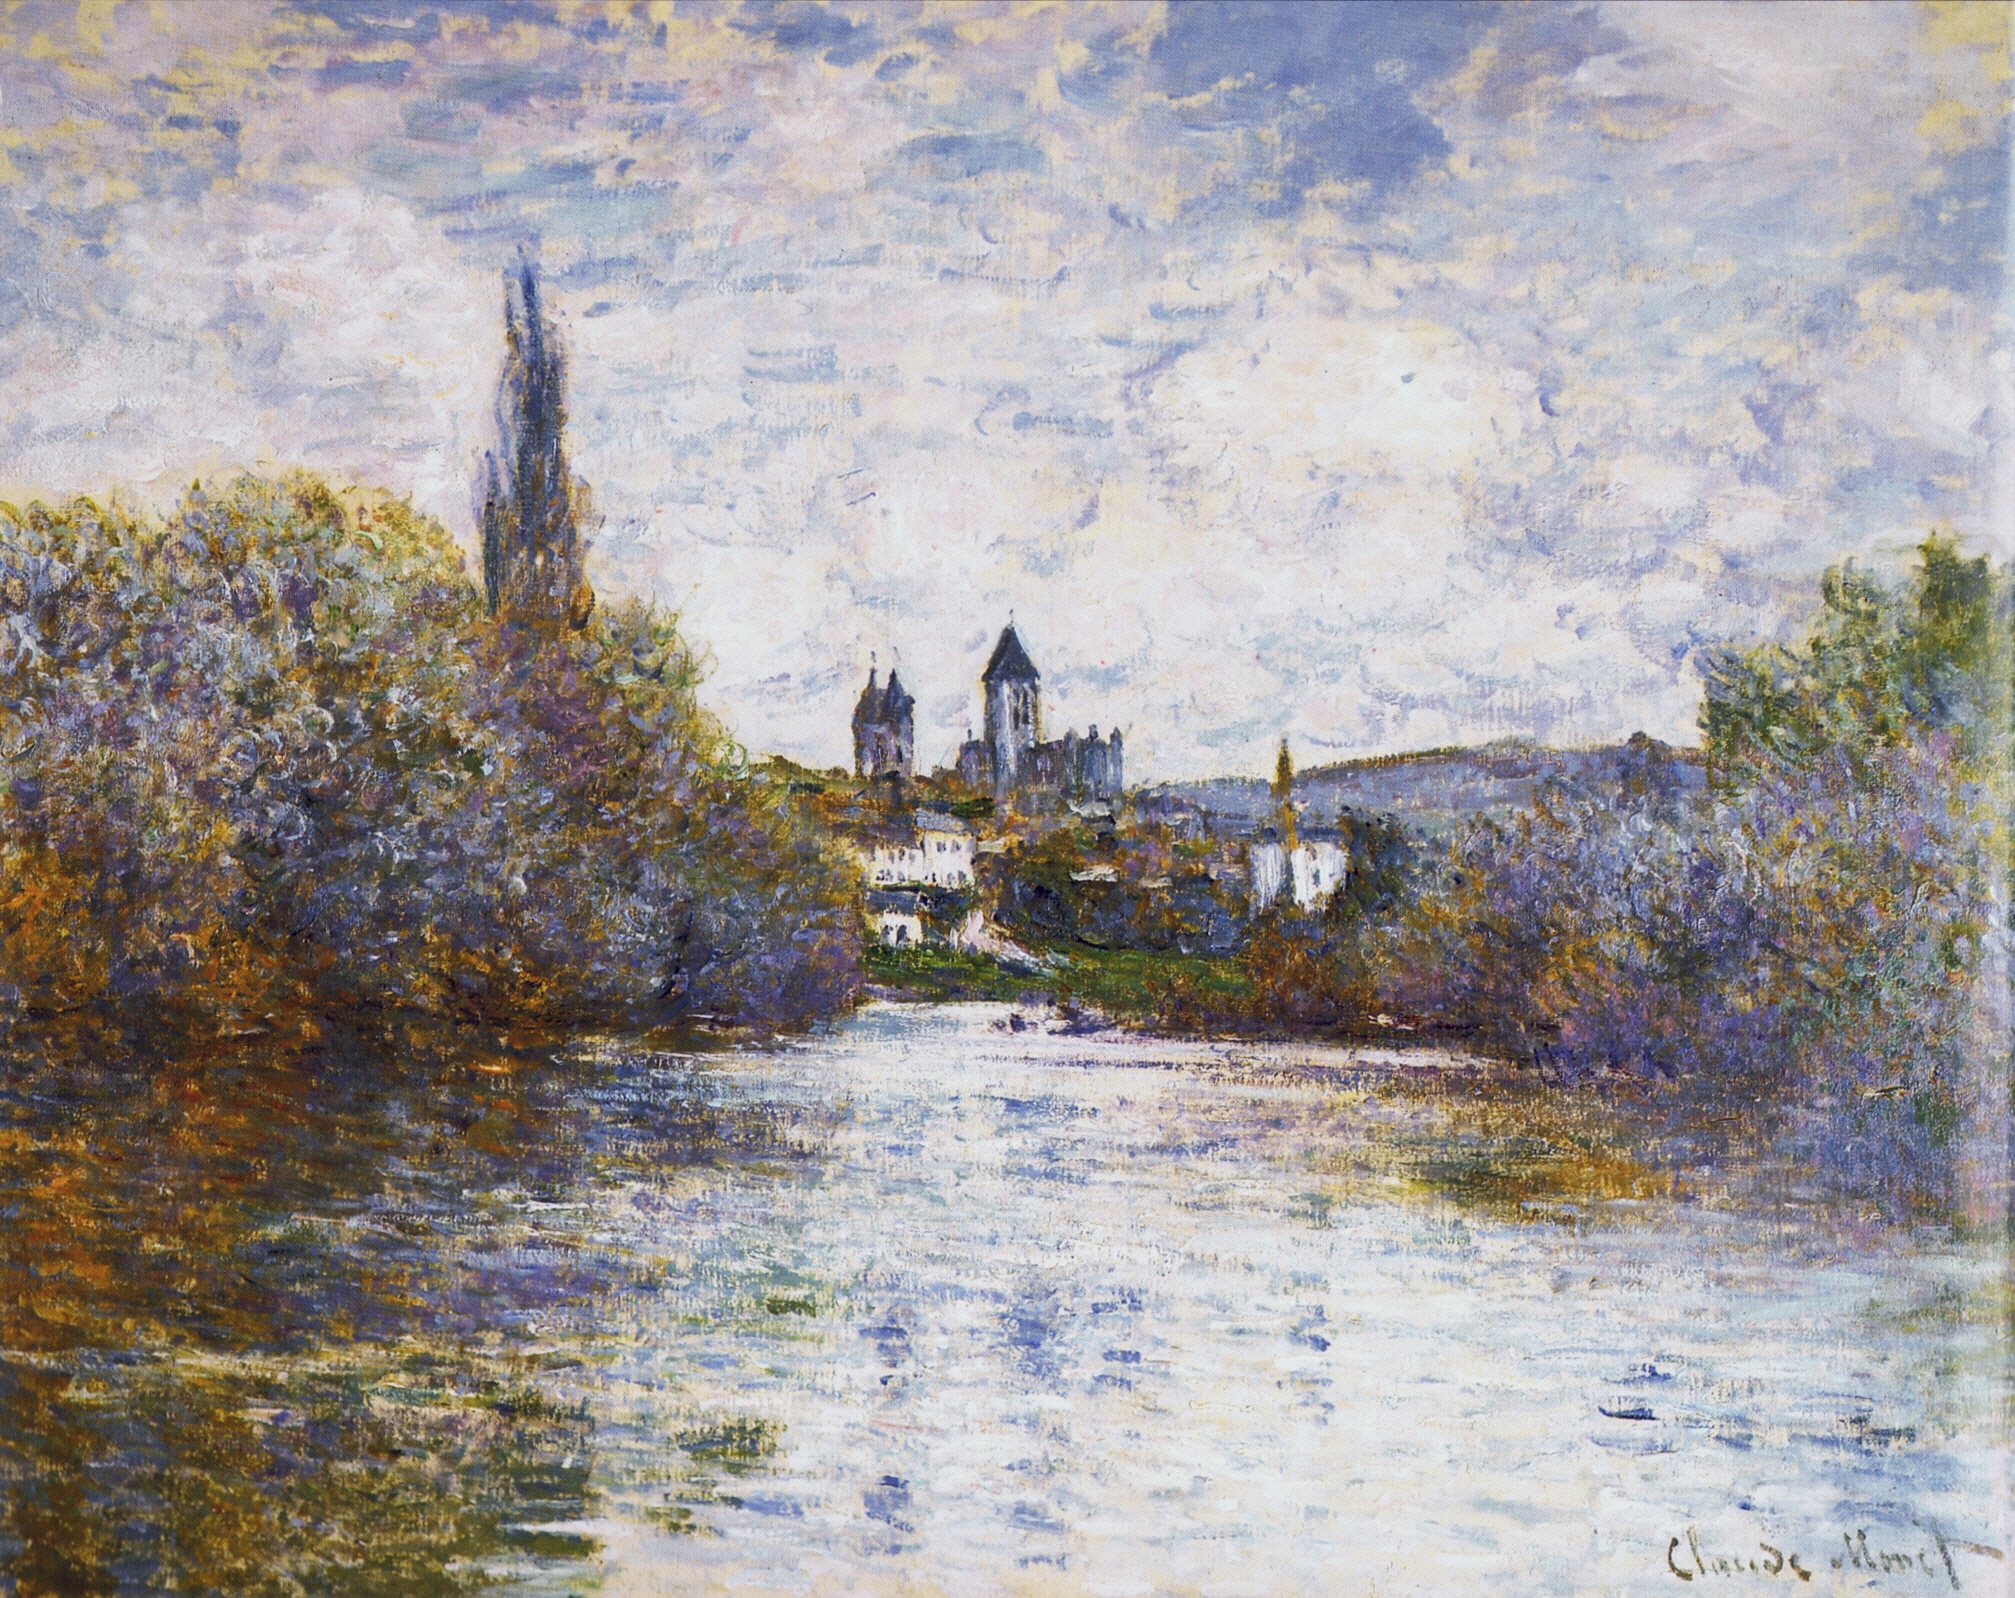 Vetheuil, The Small Arm of the Seine 1880